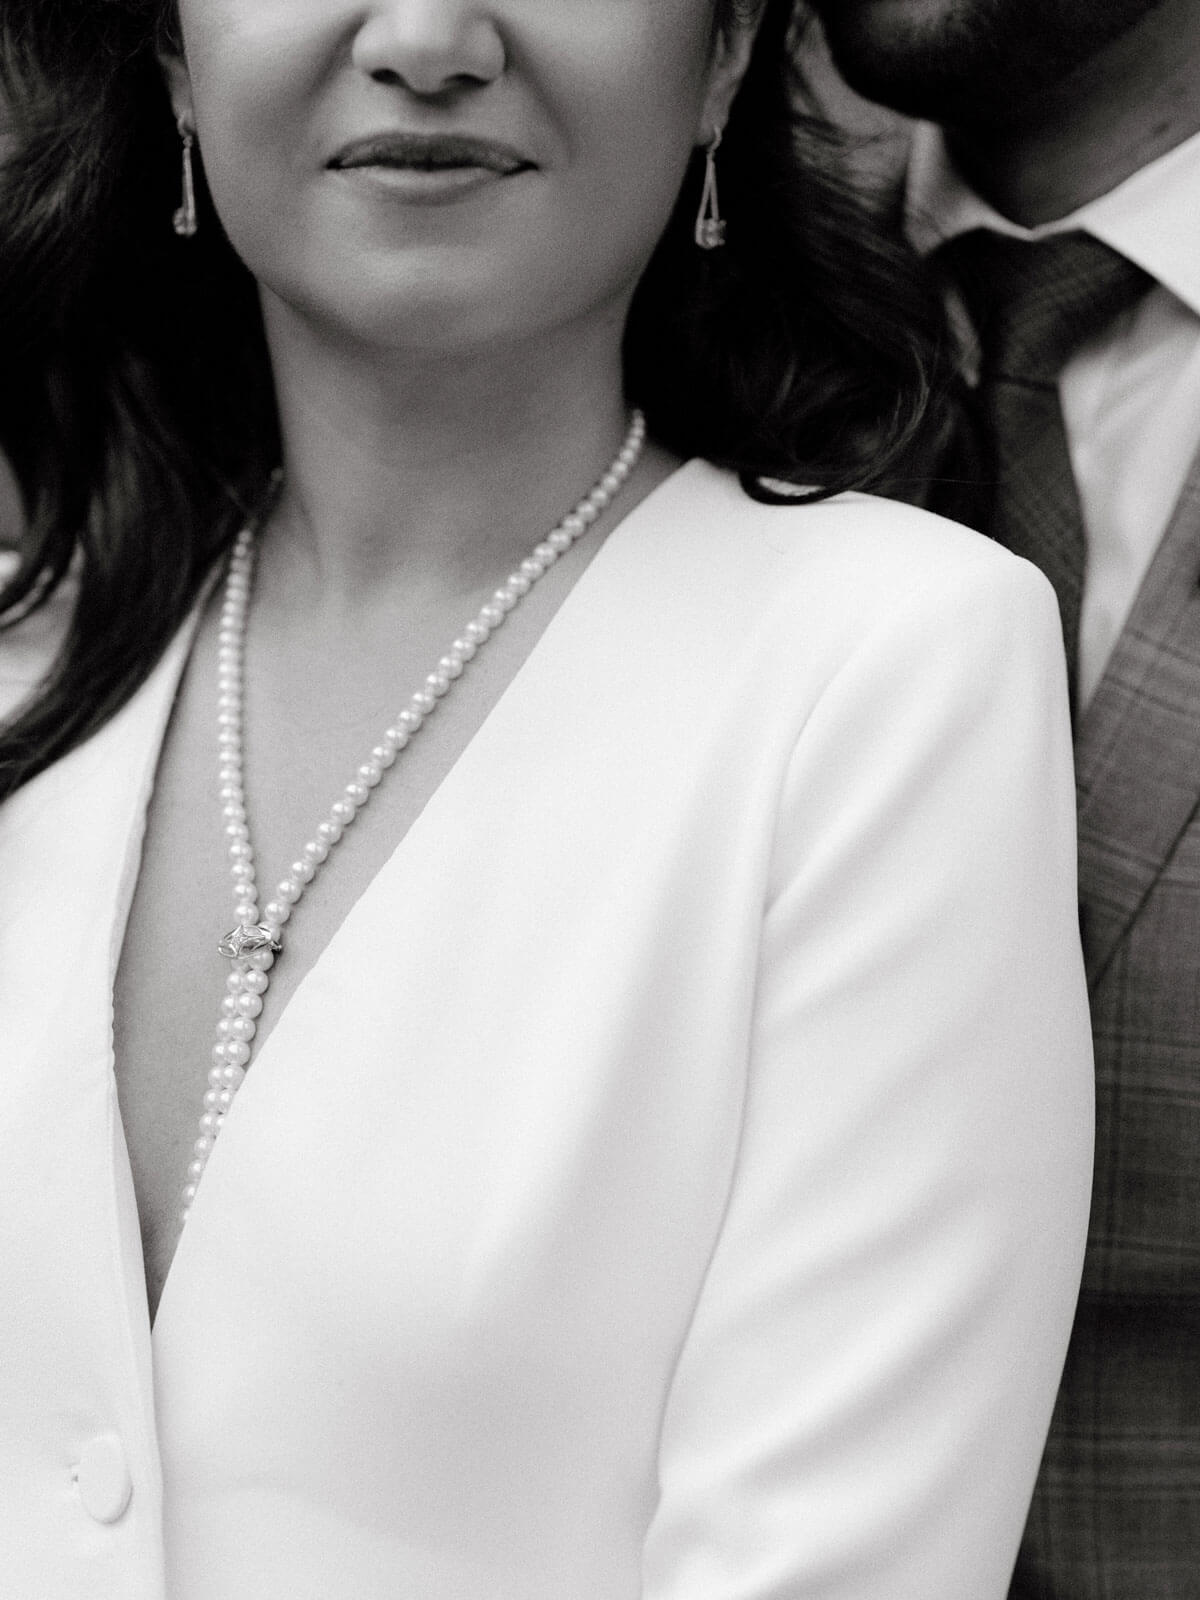 Black and white, Close-up shot of the bride's pearl necklace.